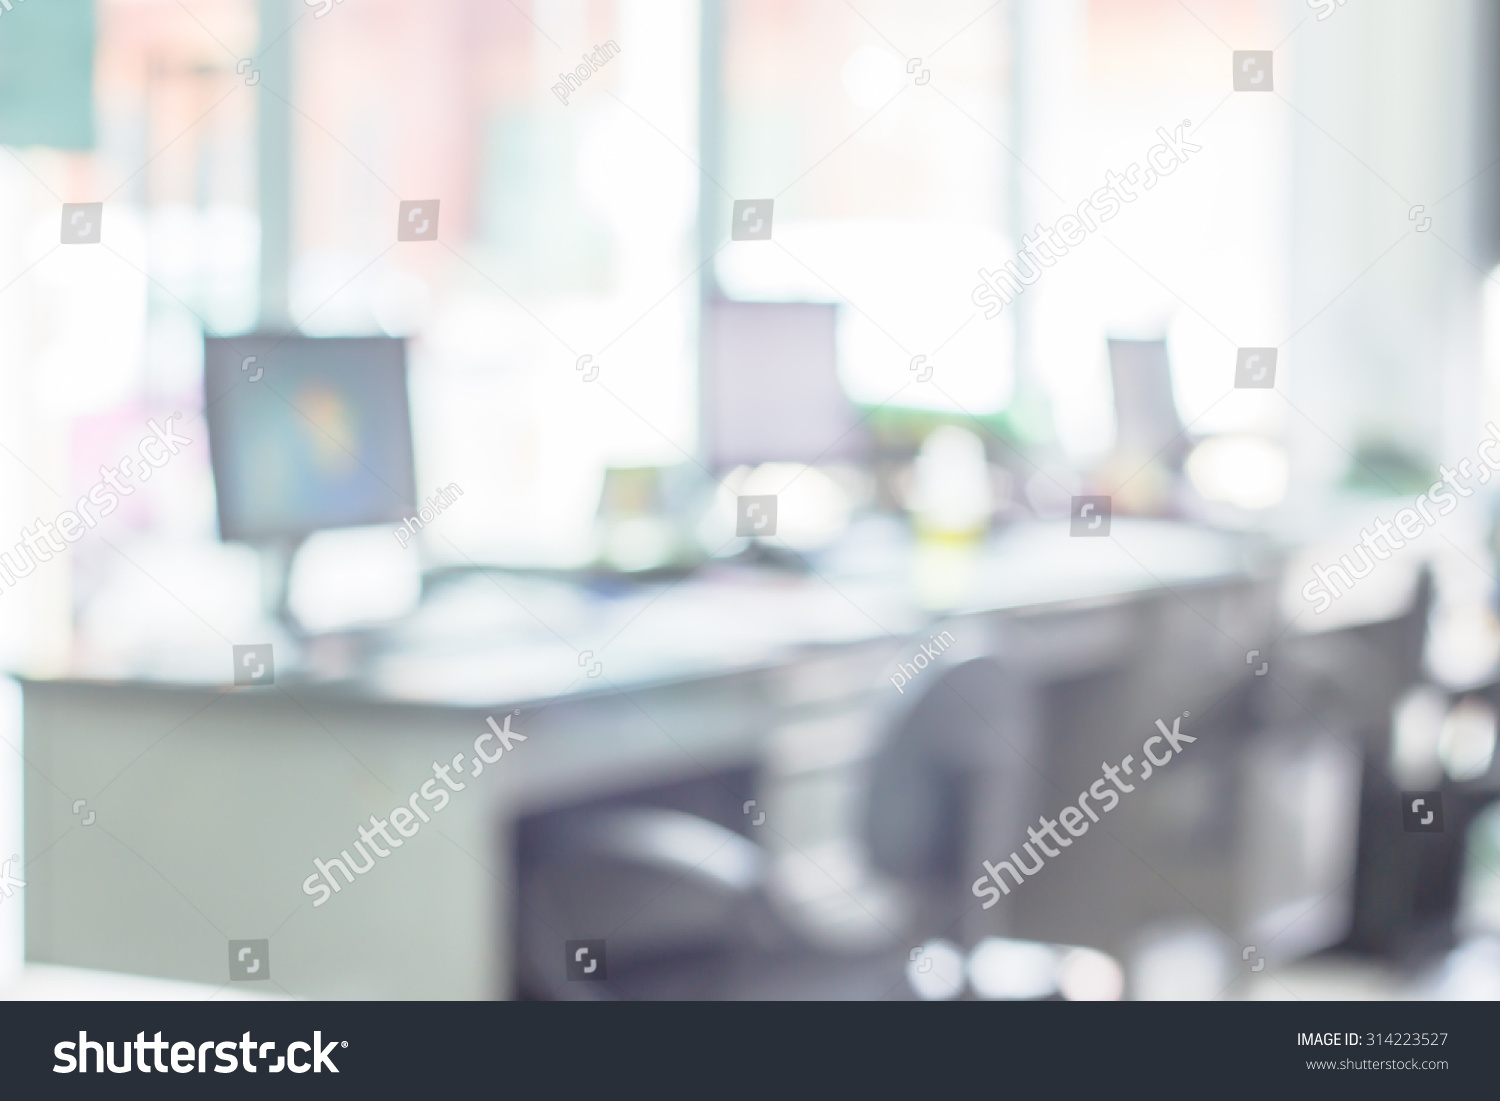 Businessmen blur in the workplace or work space of table work in office with computer or shallow depth of focus of abstract background. #314223527